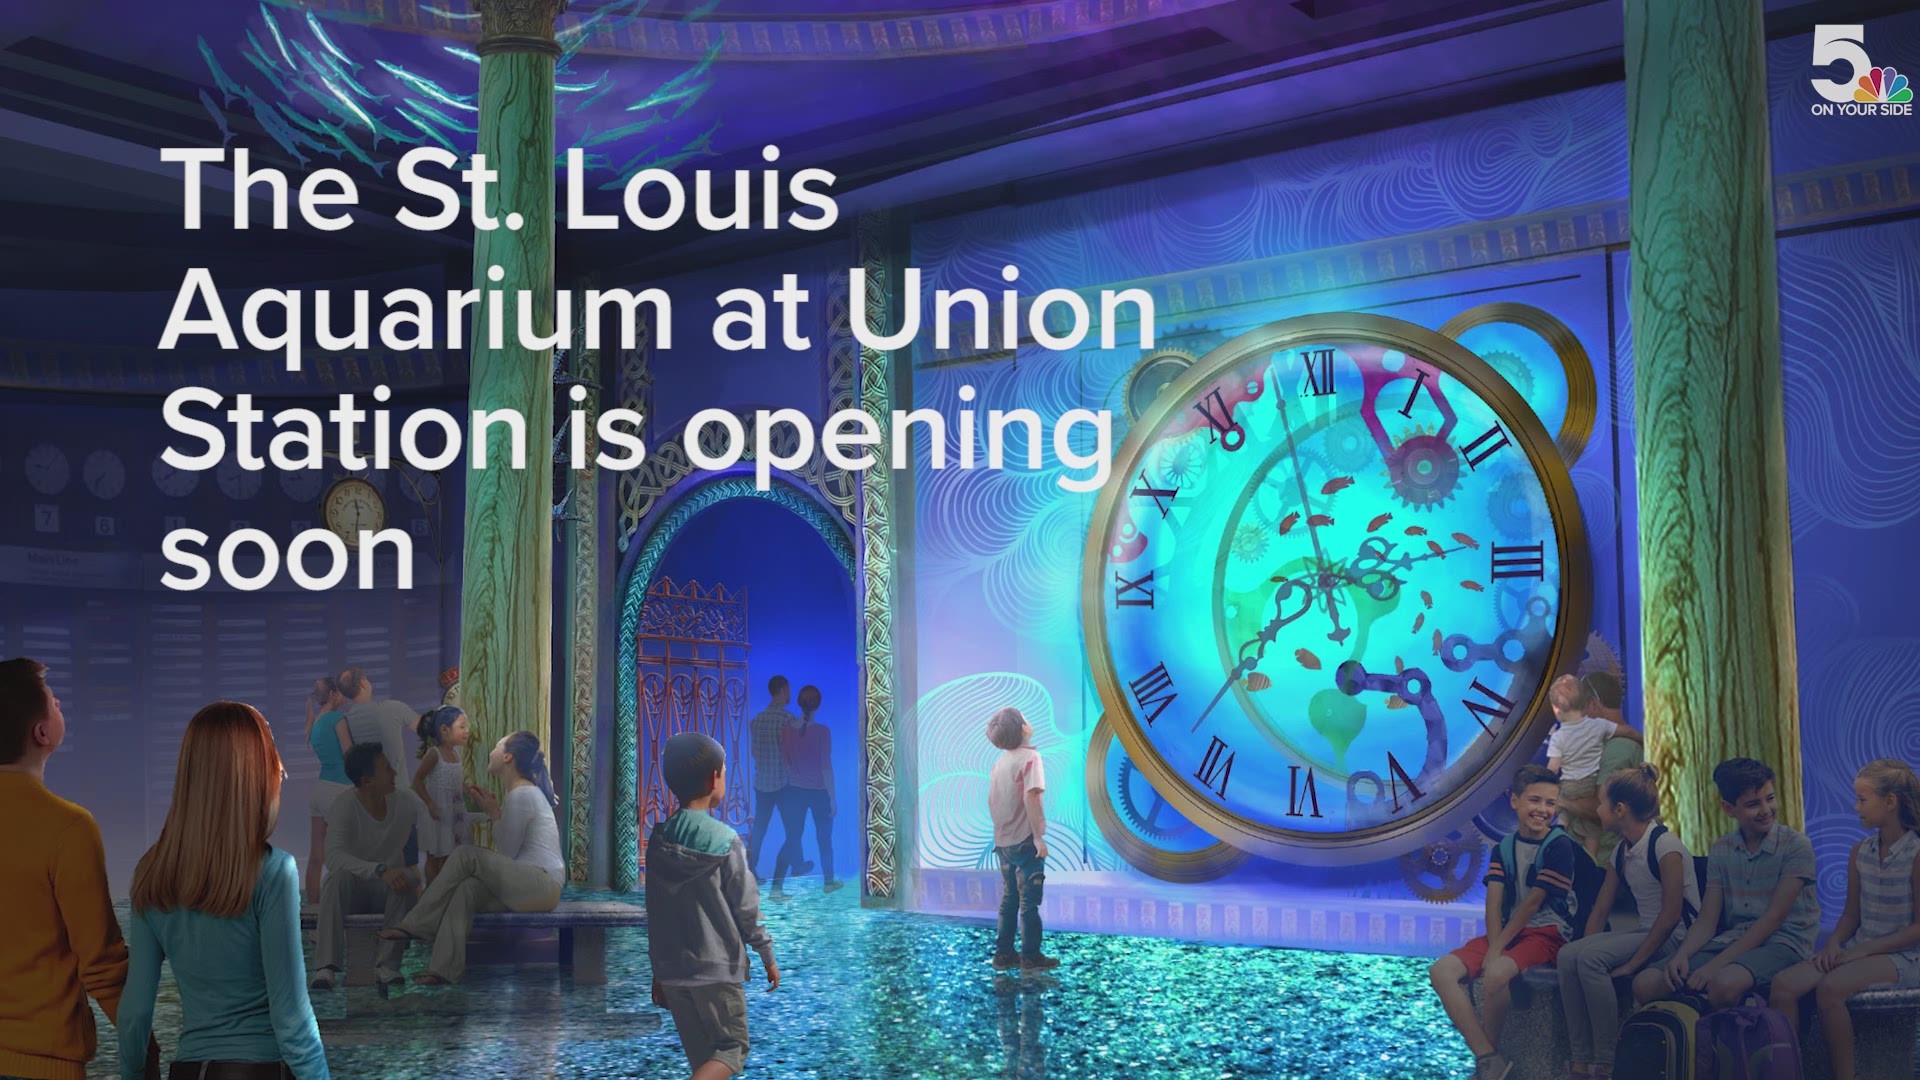 The St. Louis Aquarium at Union Station opens on Christmas Day!